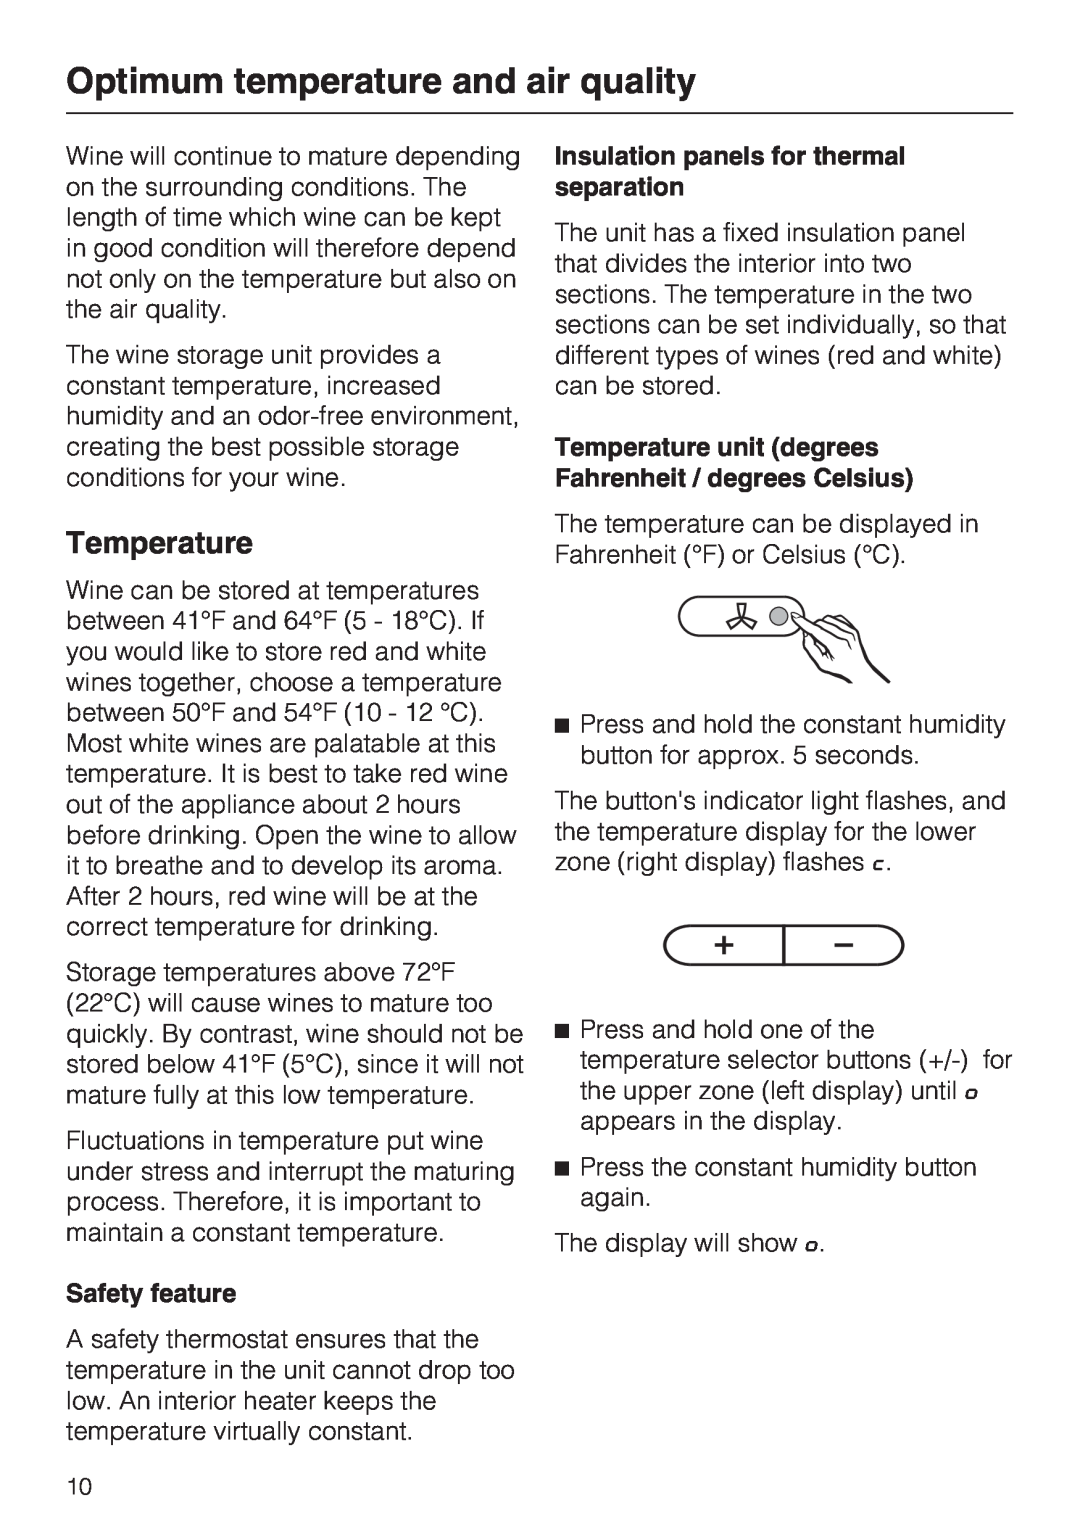 Miele KWT 4154 UG-1 installation instructions Optimum temperature and air quality, Temperature 